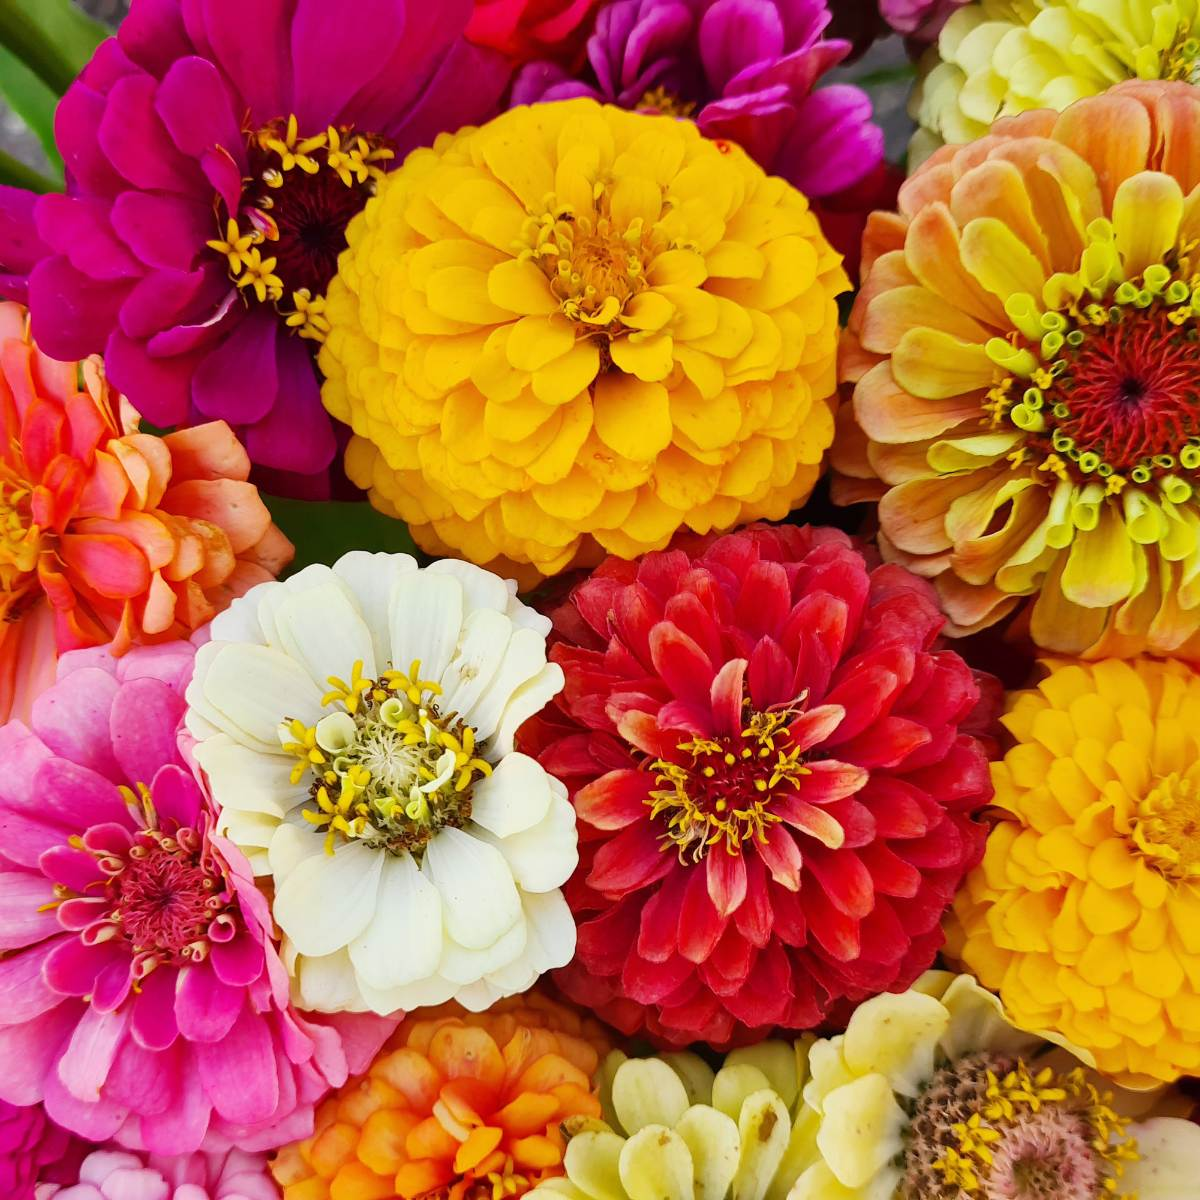 bouquets of bright zinnias delivered with hampers to your loved ones, pink, yellow